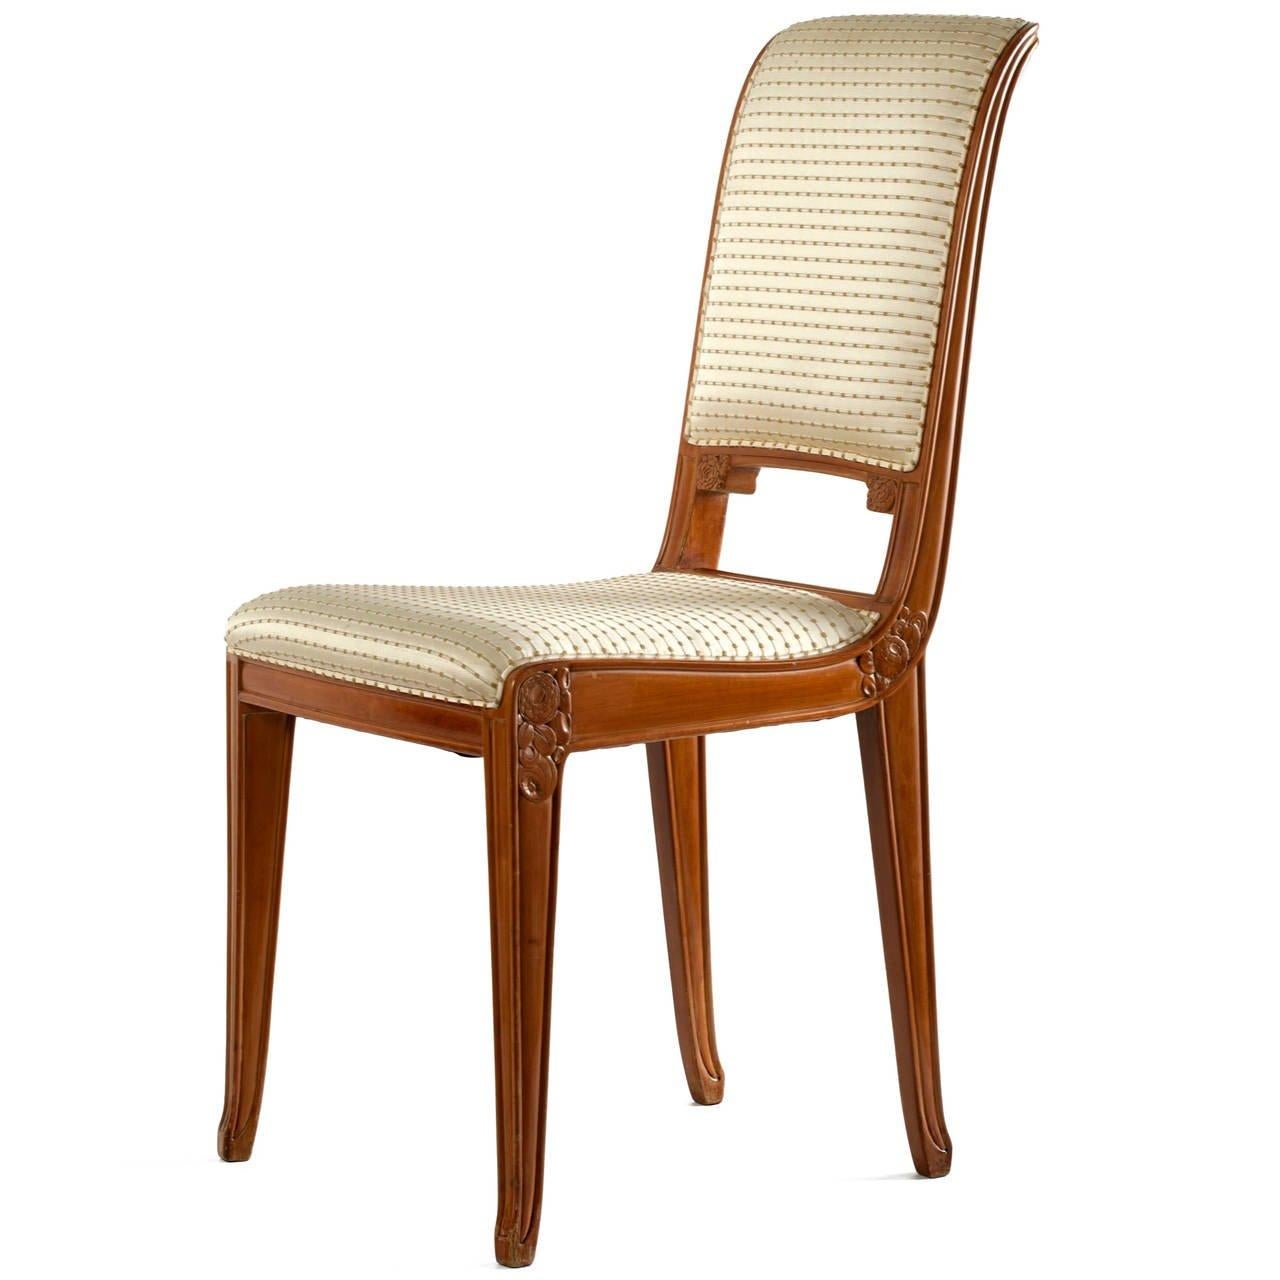 French Léon Jallot, Early Art Deco Side chair, France, c. 1922 For Sale